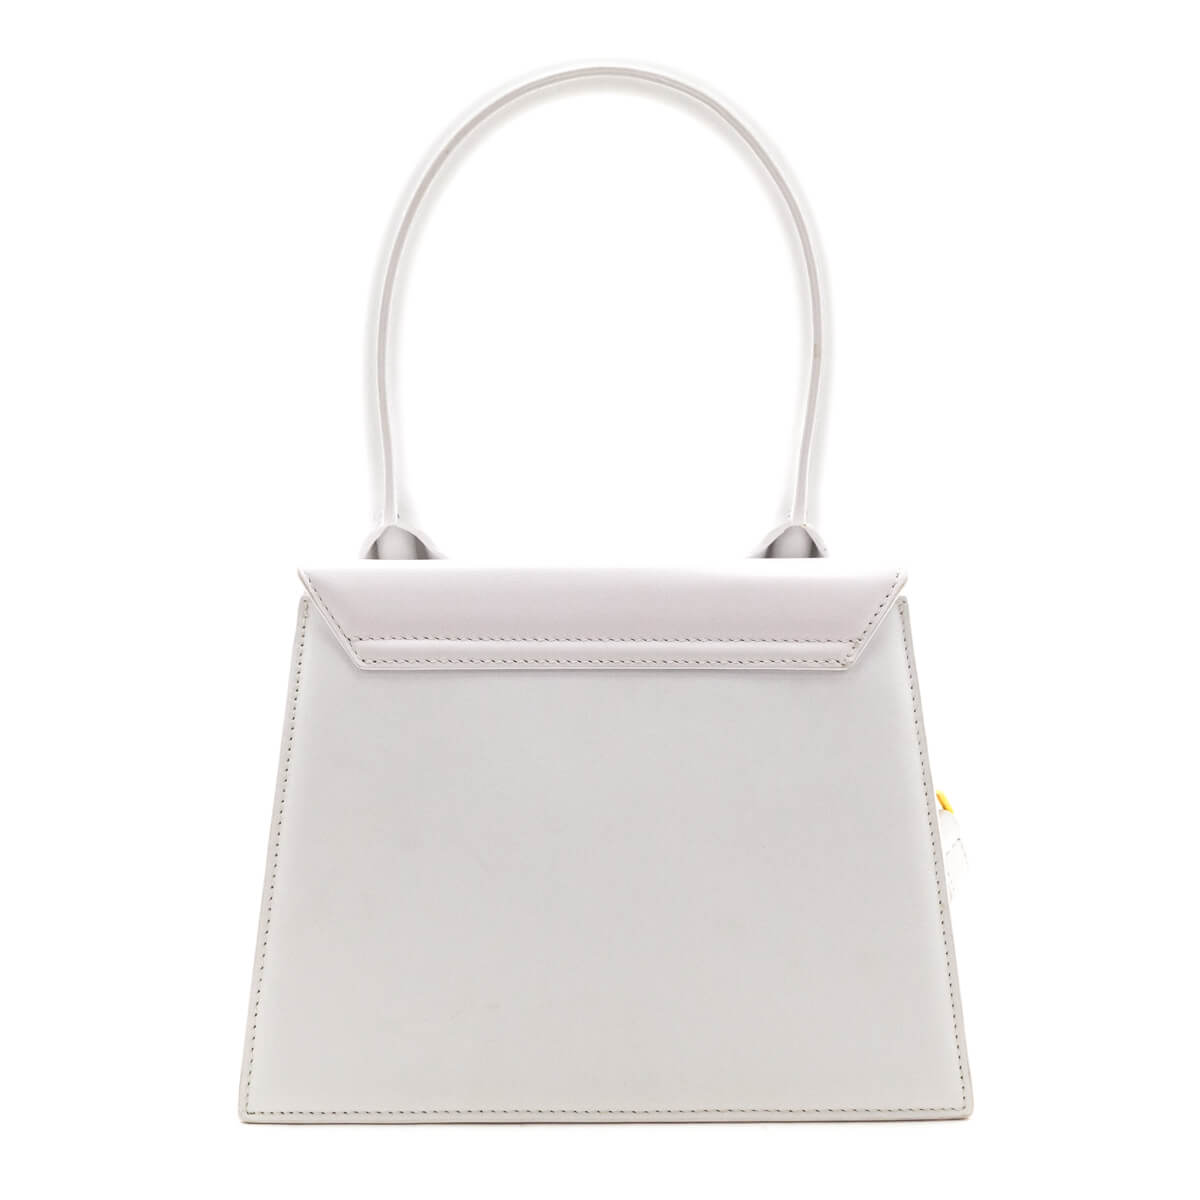 Jacquemus White Calfskin Le Grand Chiquito Bag - Love that Bag etc - Preowned Authentic Designer Handbags & Preloved Fashions